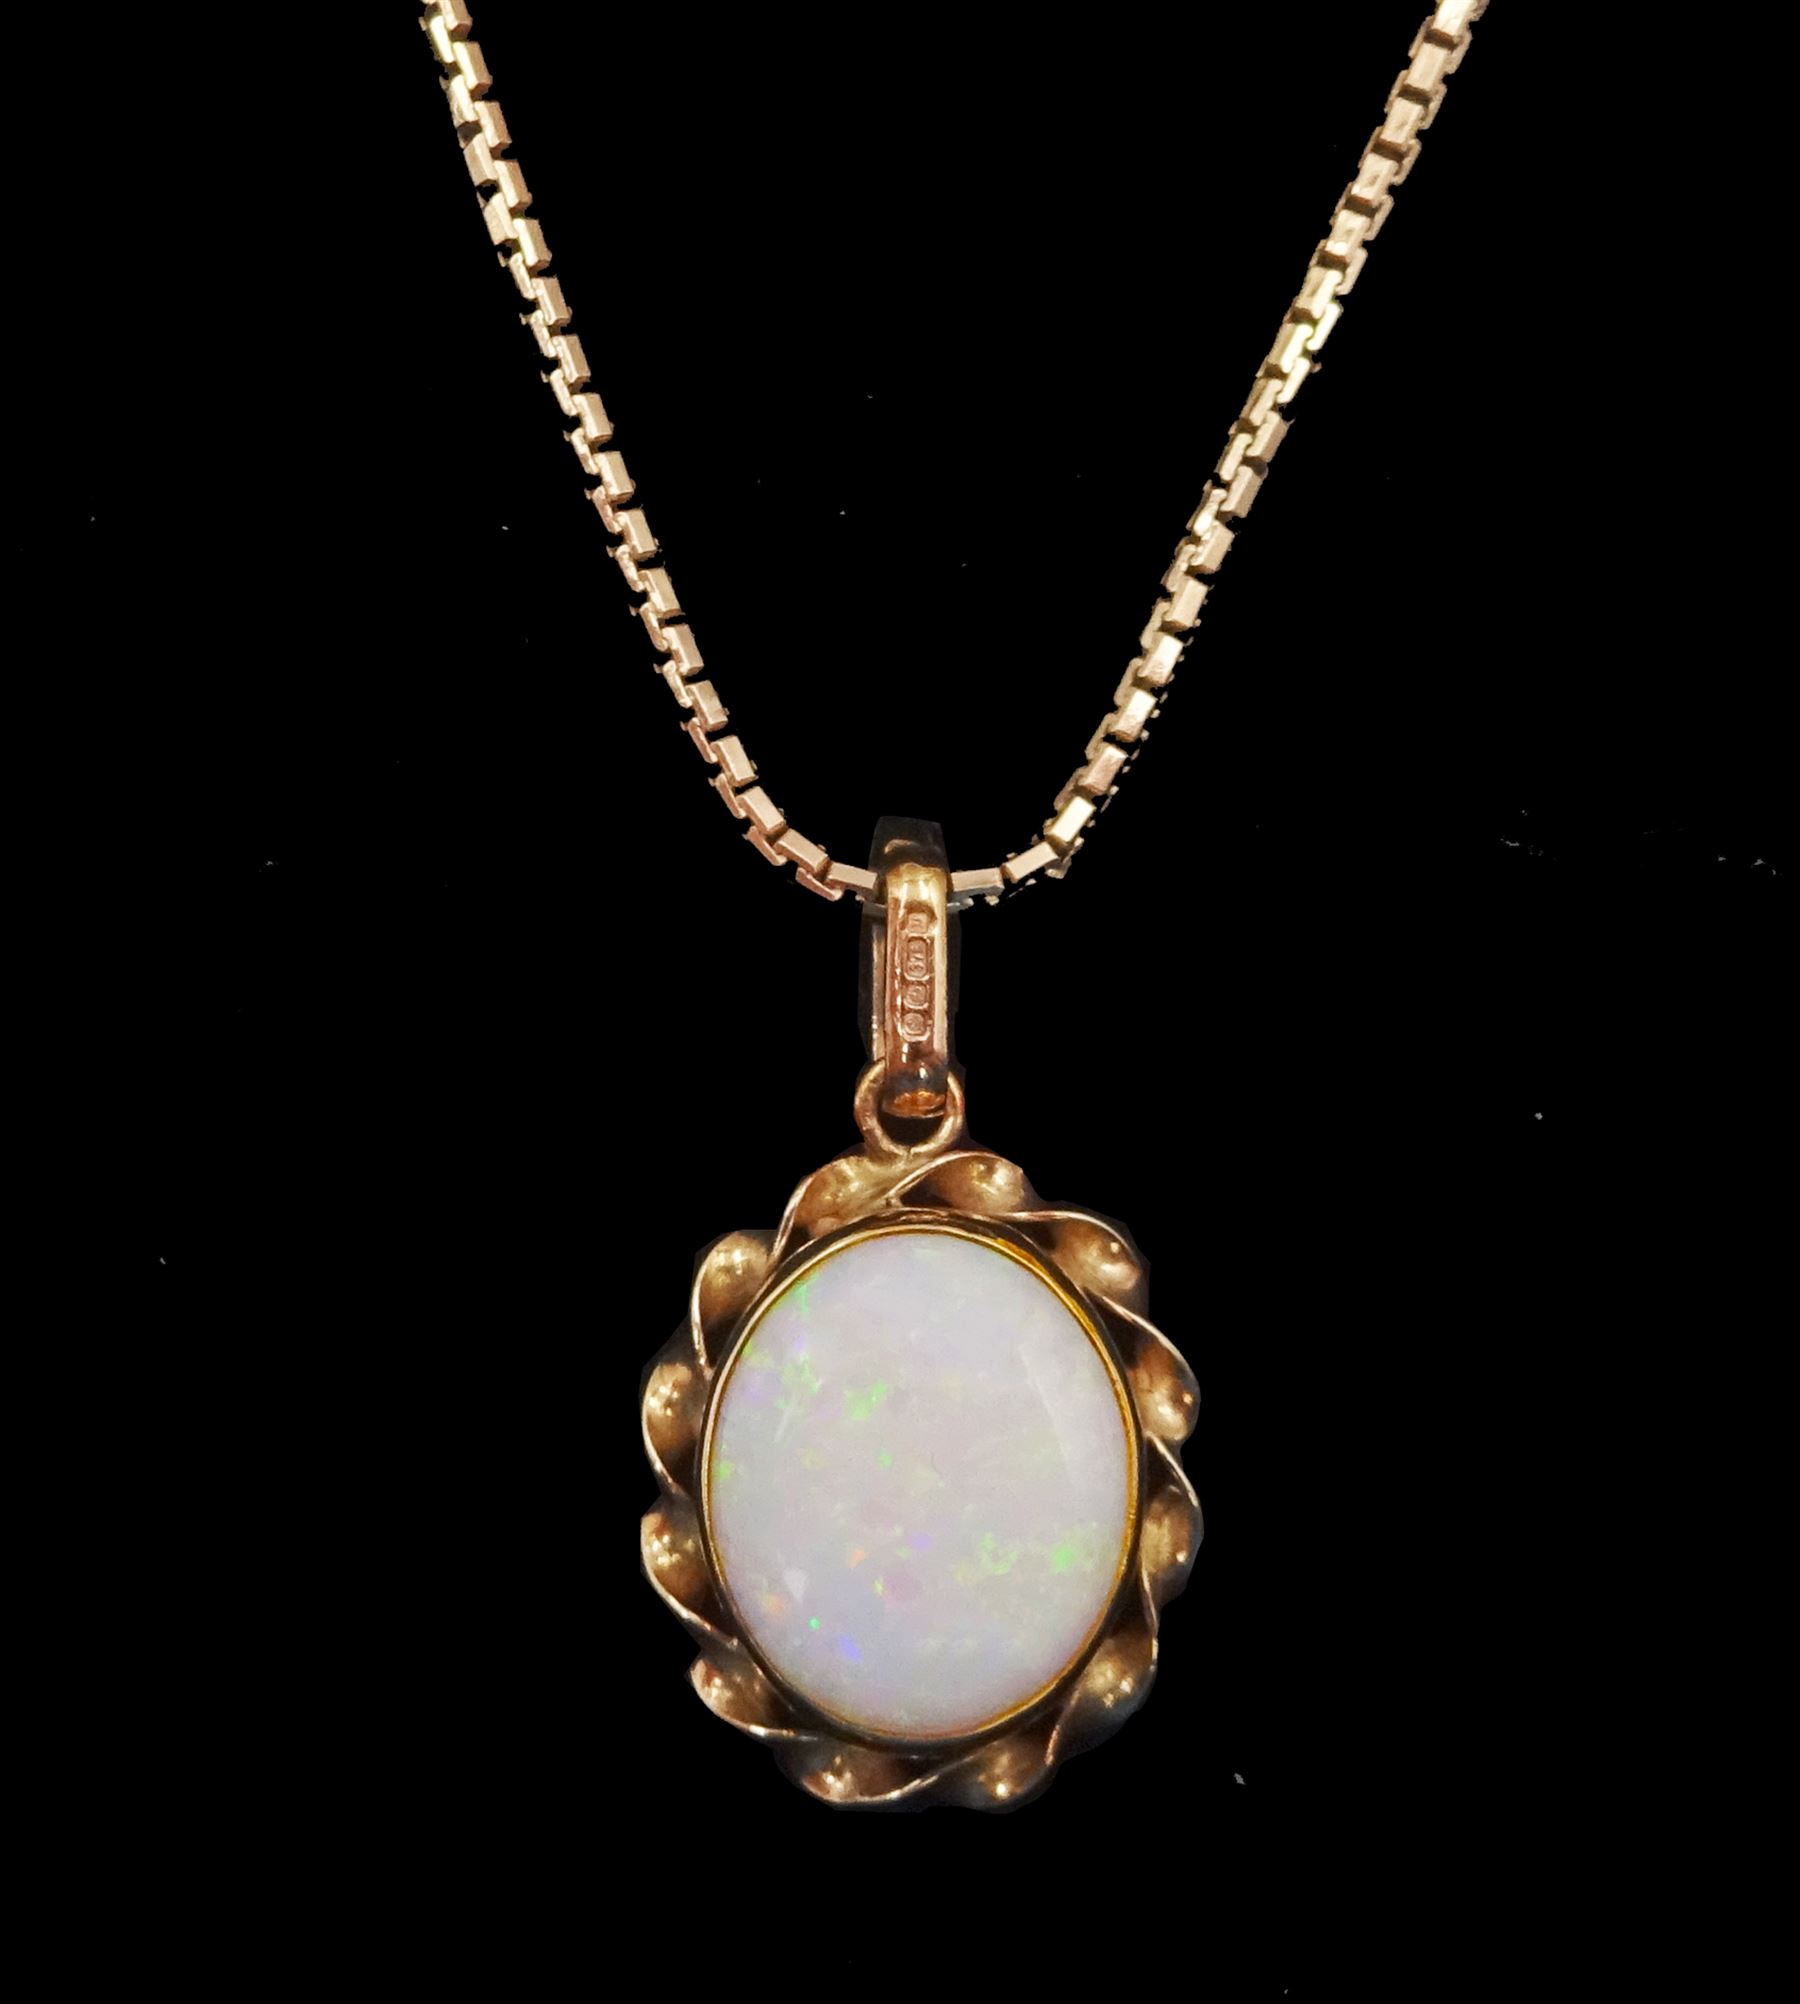 9ct gold oval opal pendant necklace